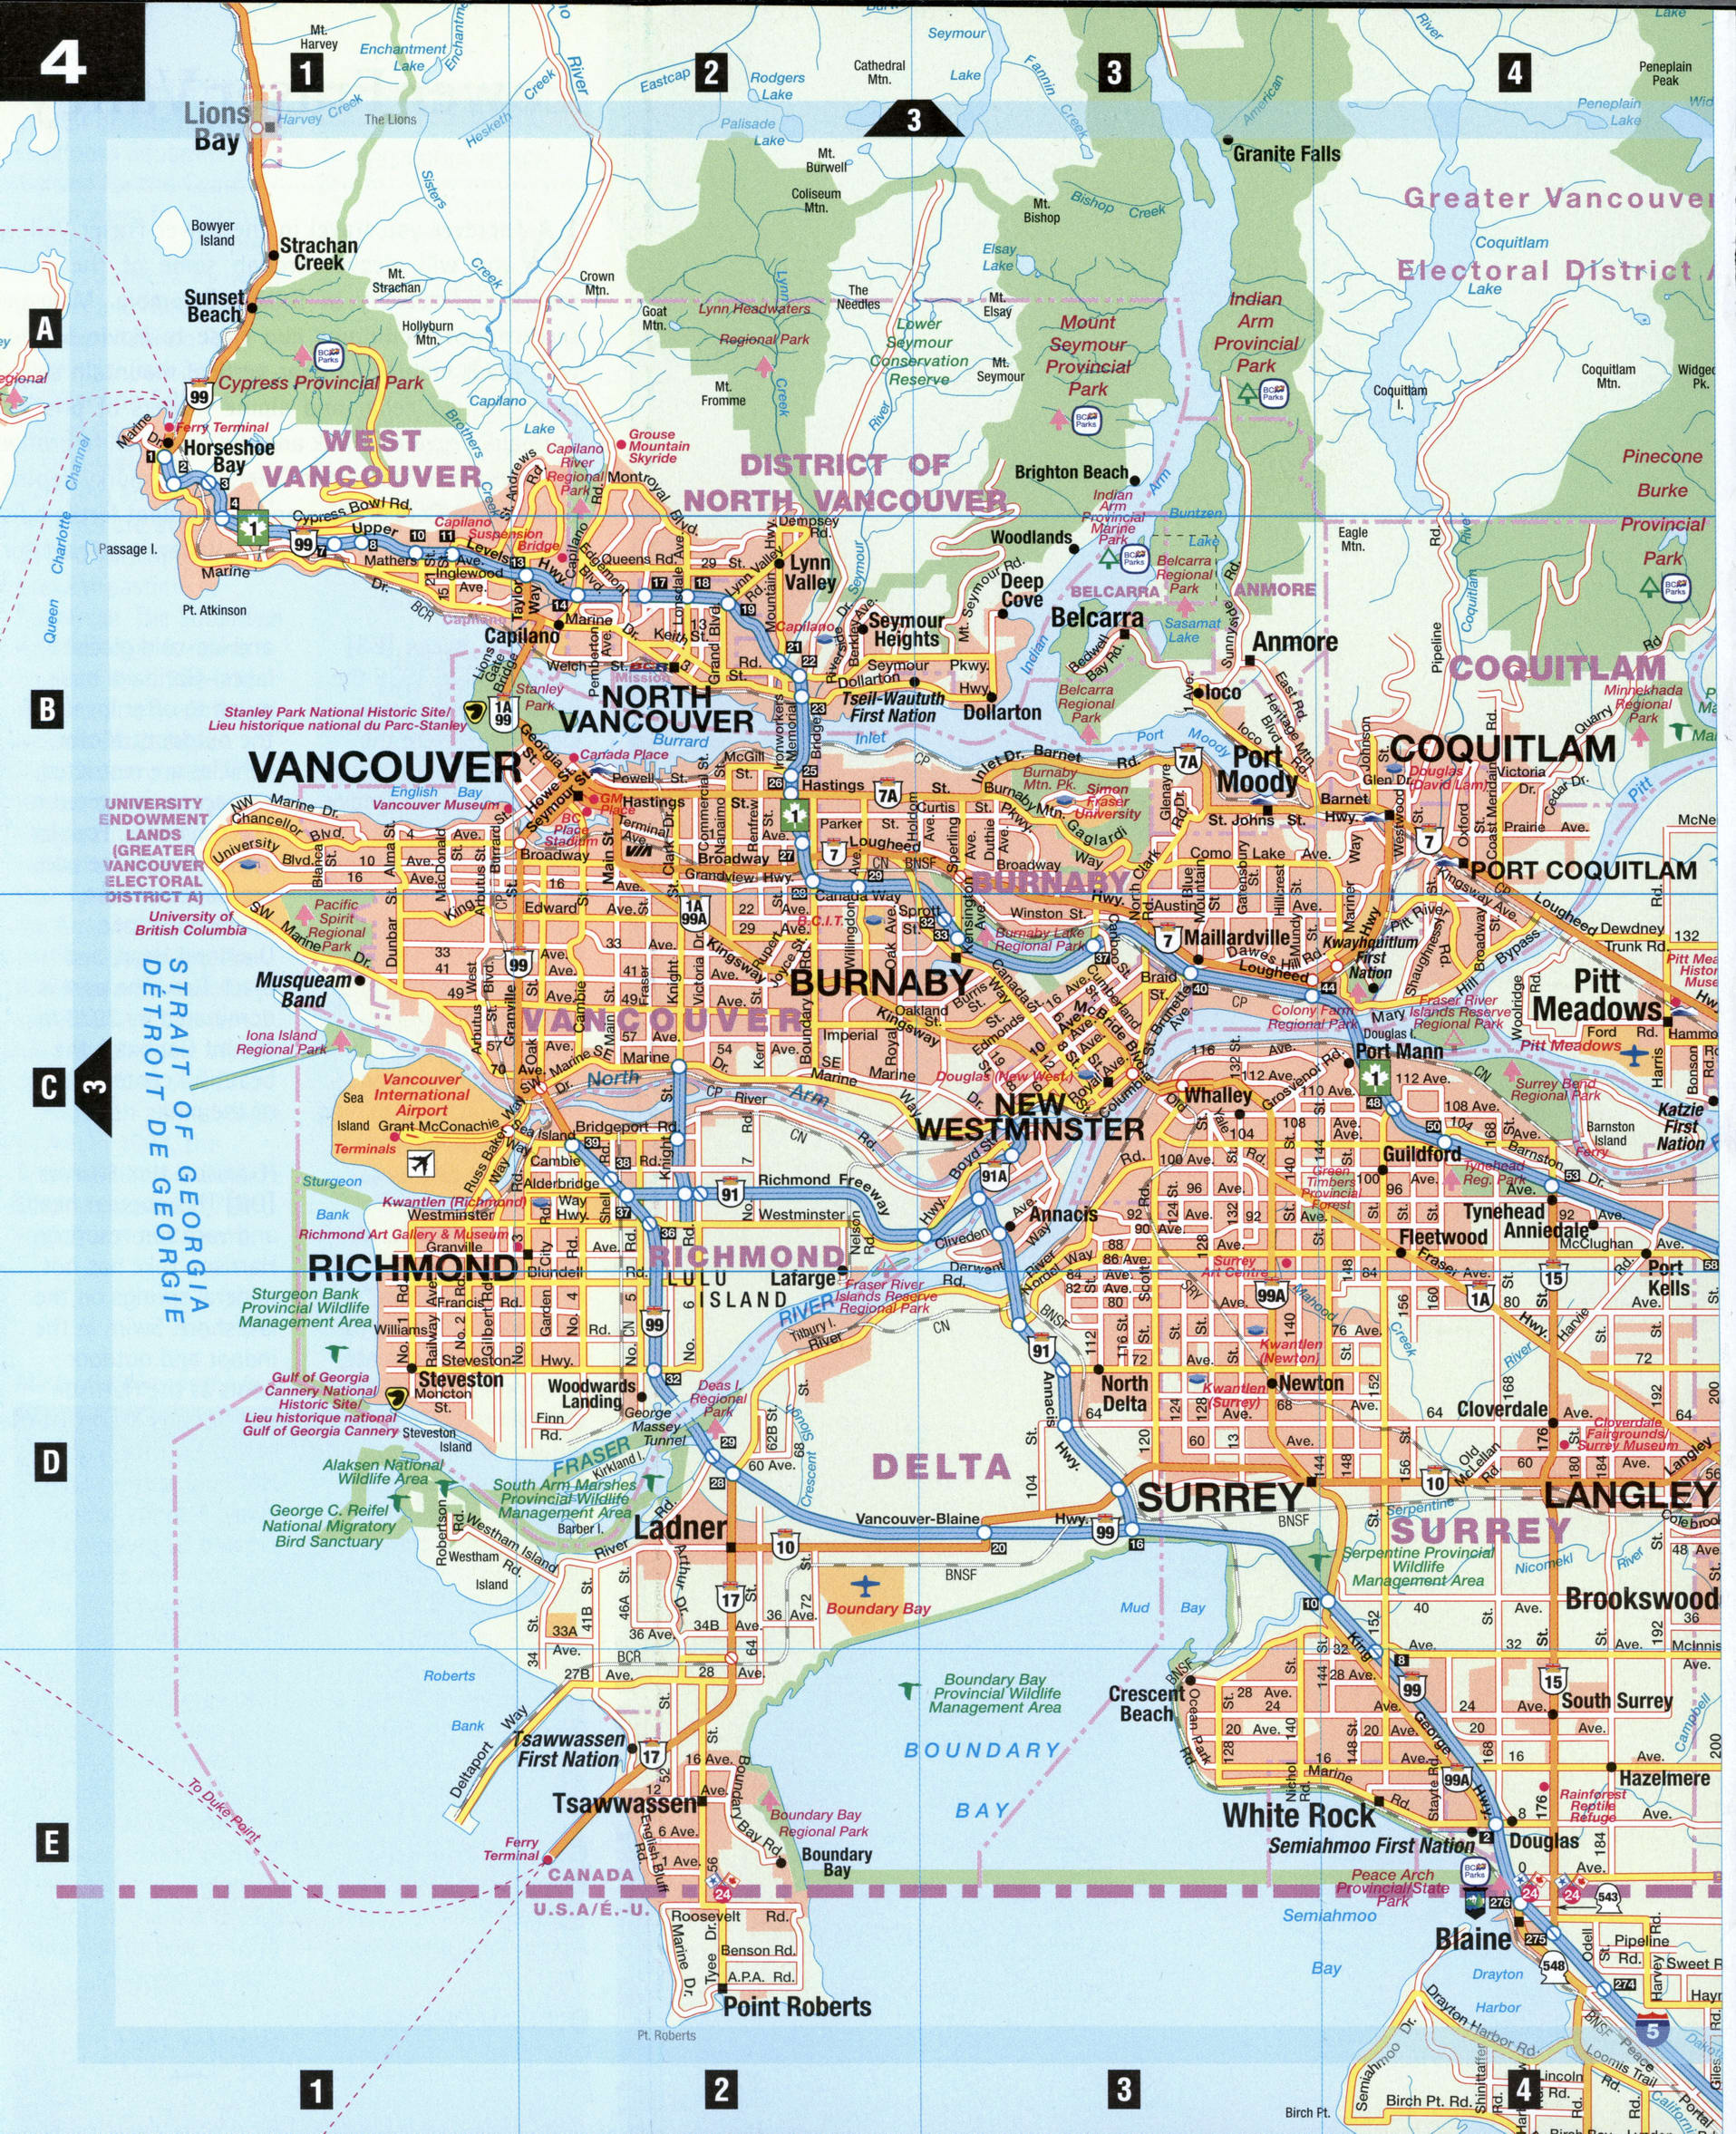 Greater Vancouver map jpg 